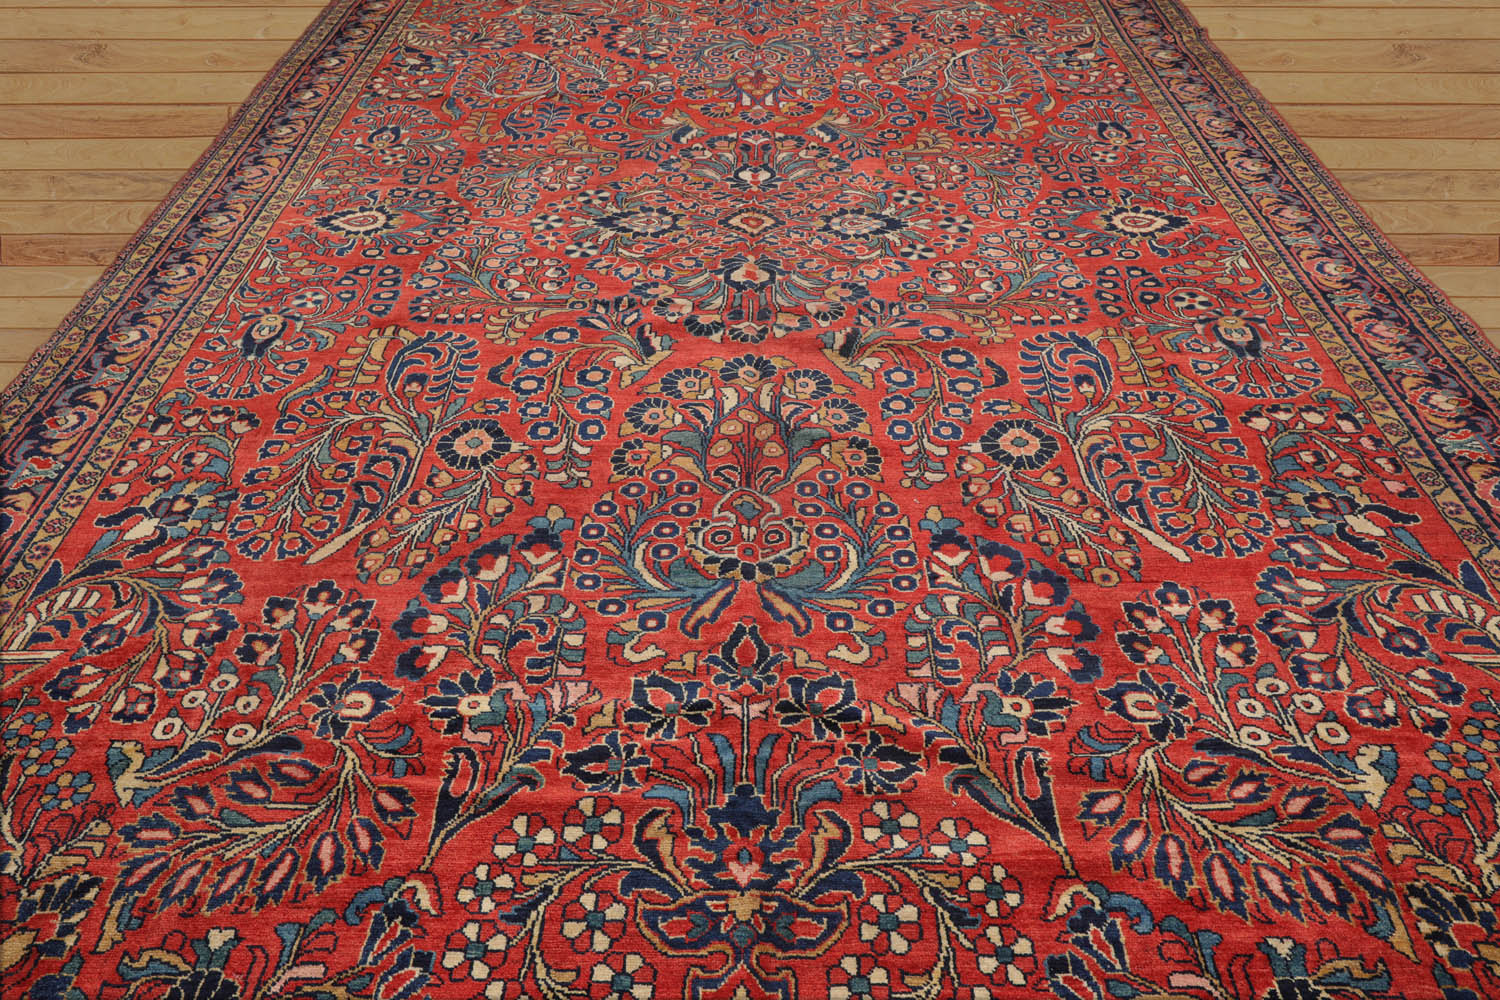 Kato Palace Hand Knotted 100% Wool Vintage Palace Lilihan Traditional Oriental Area Rug Burnt Orange, Navy Color